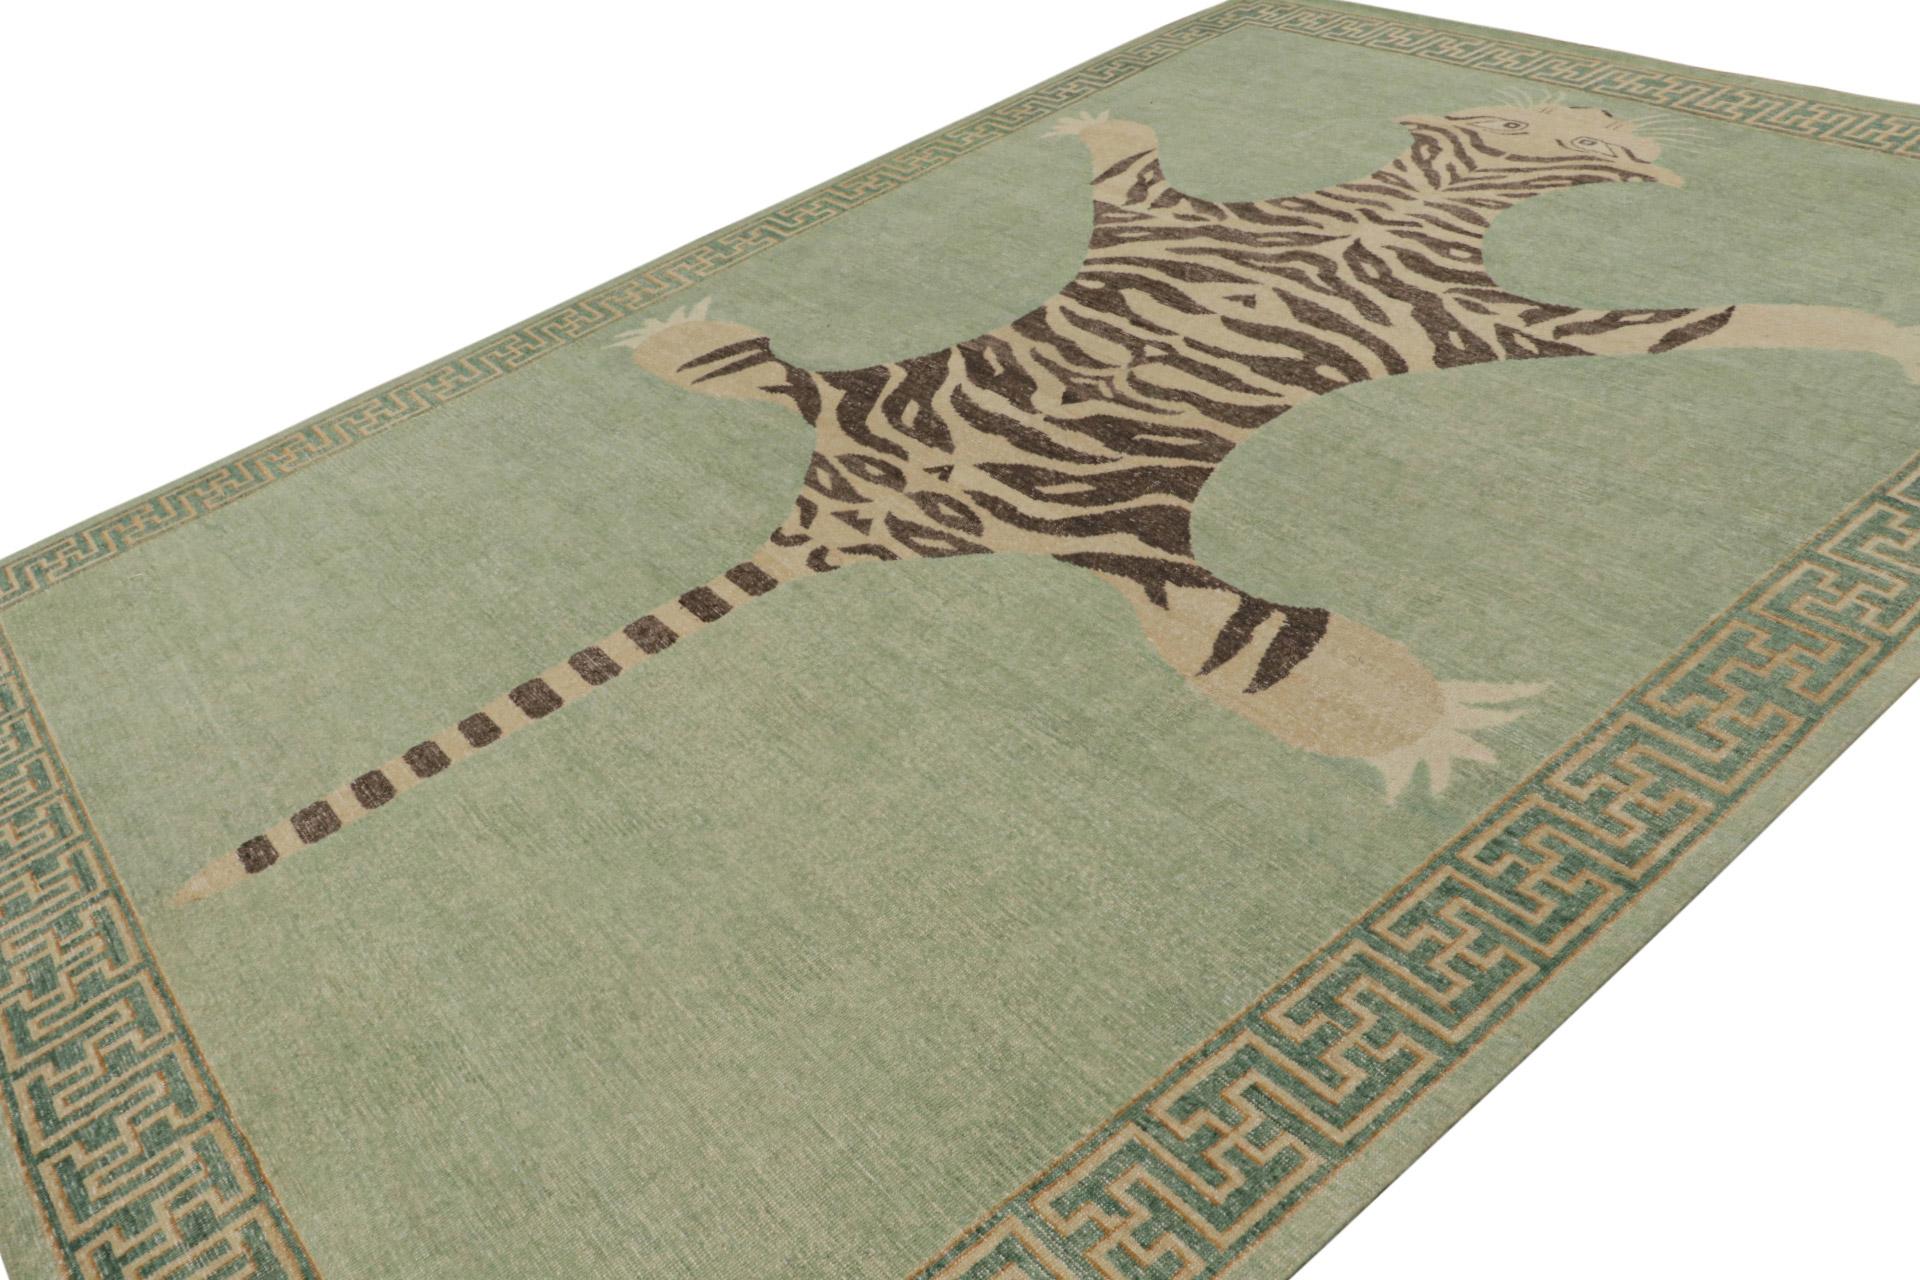 Hand-knotted in wool, this 10x14 modern rug from our Tiger rug line in Homage collection, celebrates one of the most rare and treasured pictorial animal rug styles in history. 

On the Design: 

This geometric pictorial piece joins the latest